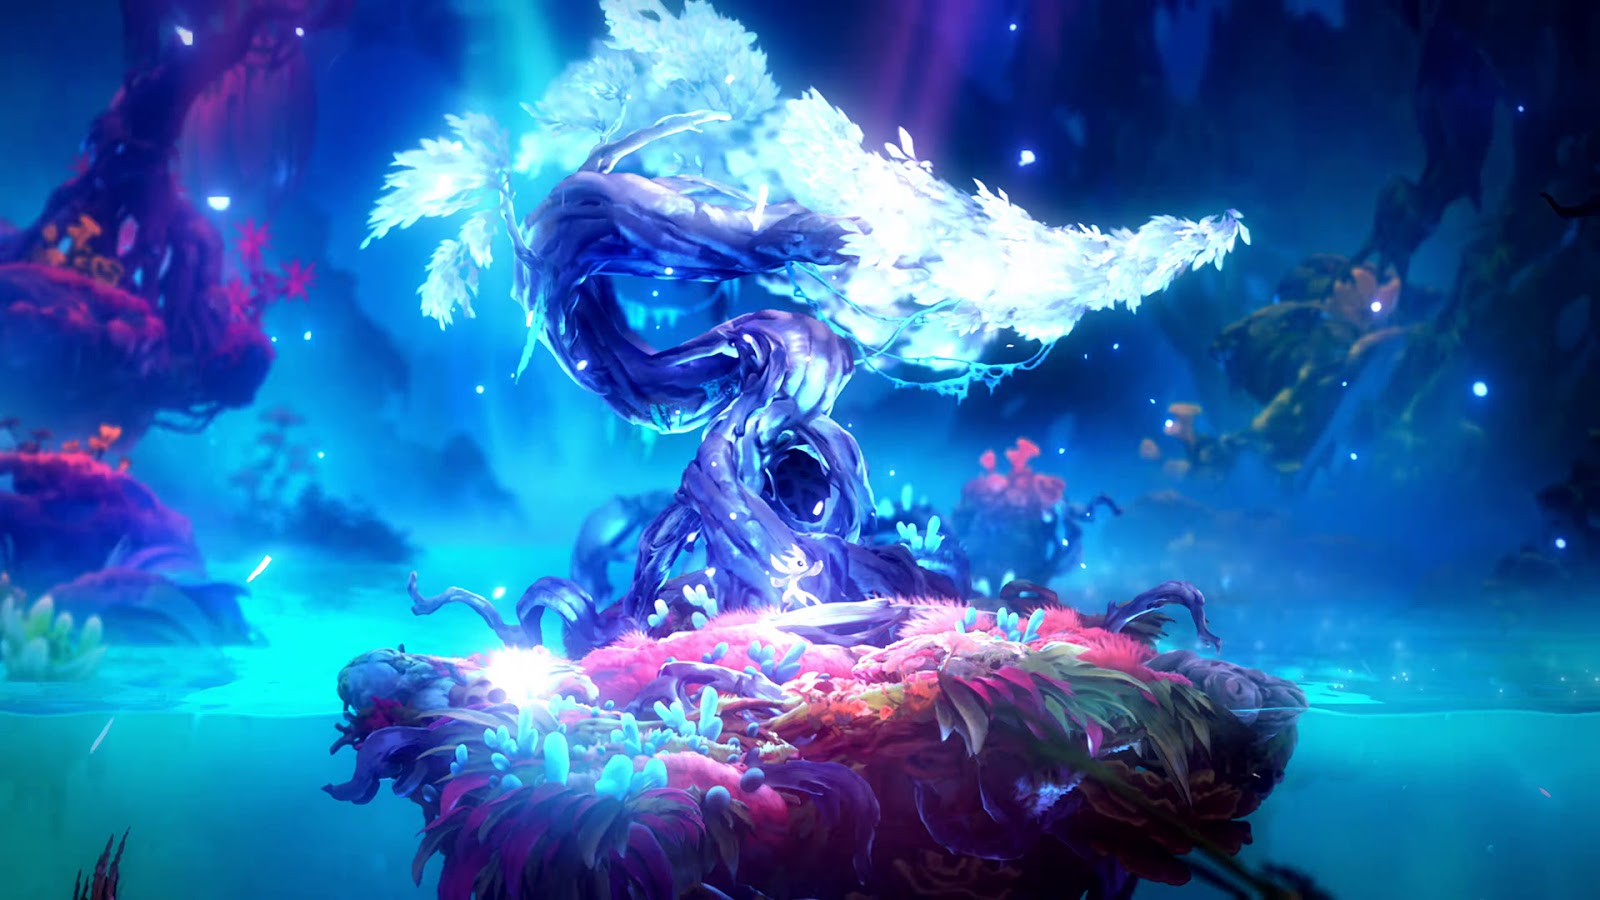 Top 10 Games of 2020: Ori and the Will of the Wisps